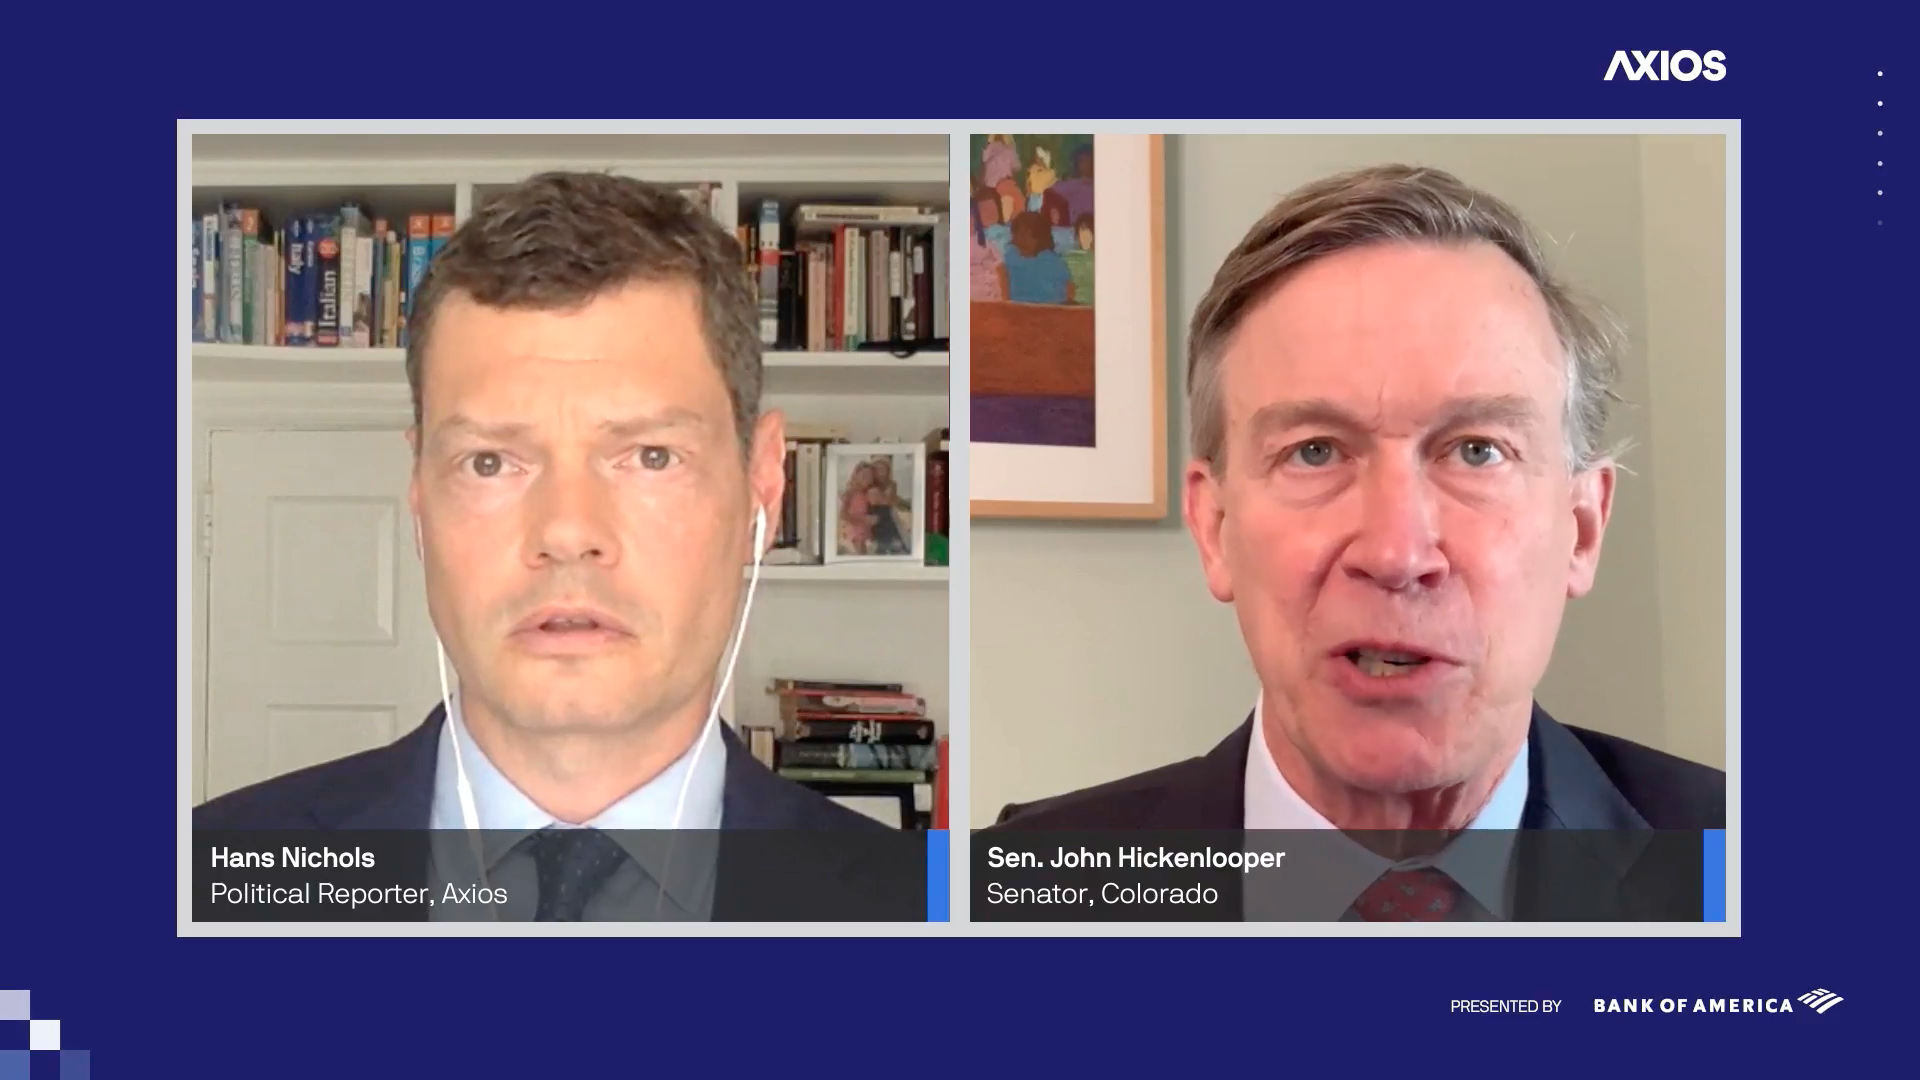 Screenshot of an Axios event with Hans Nichol and John Hickenlooper in the same frame